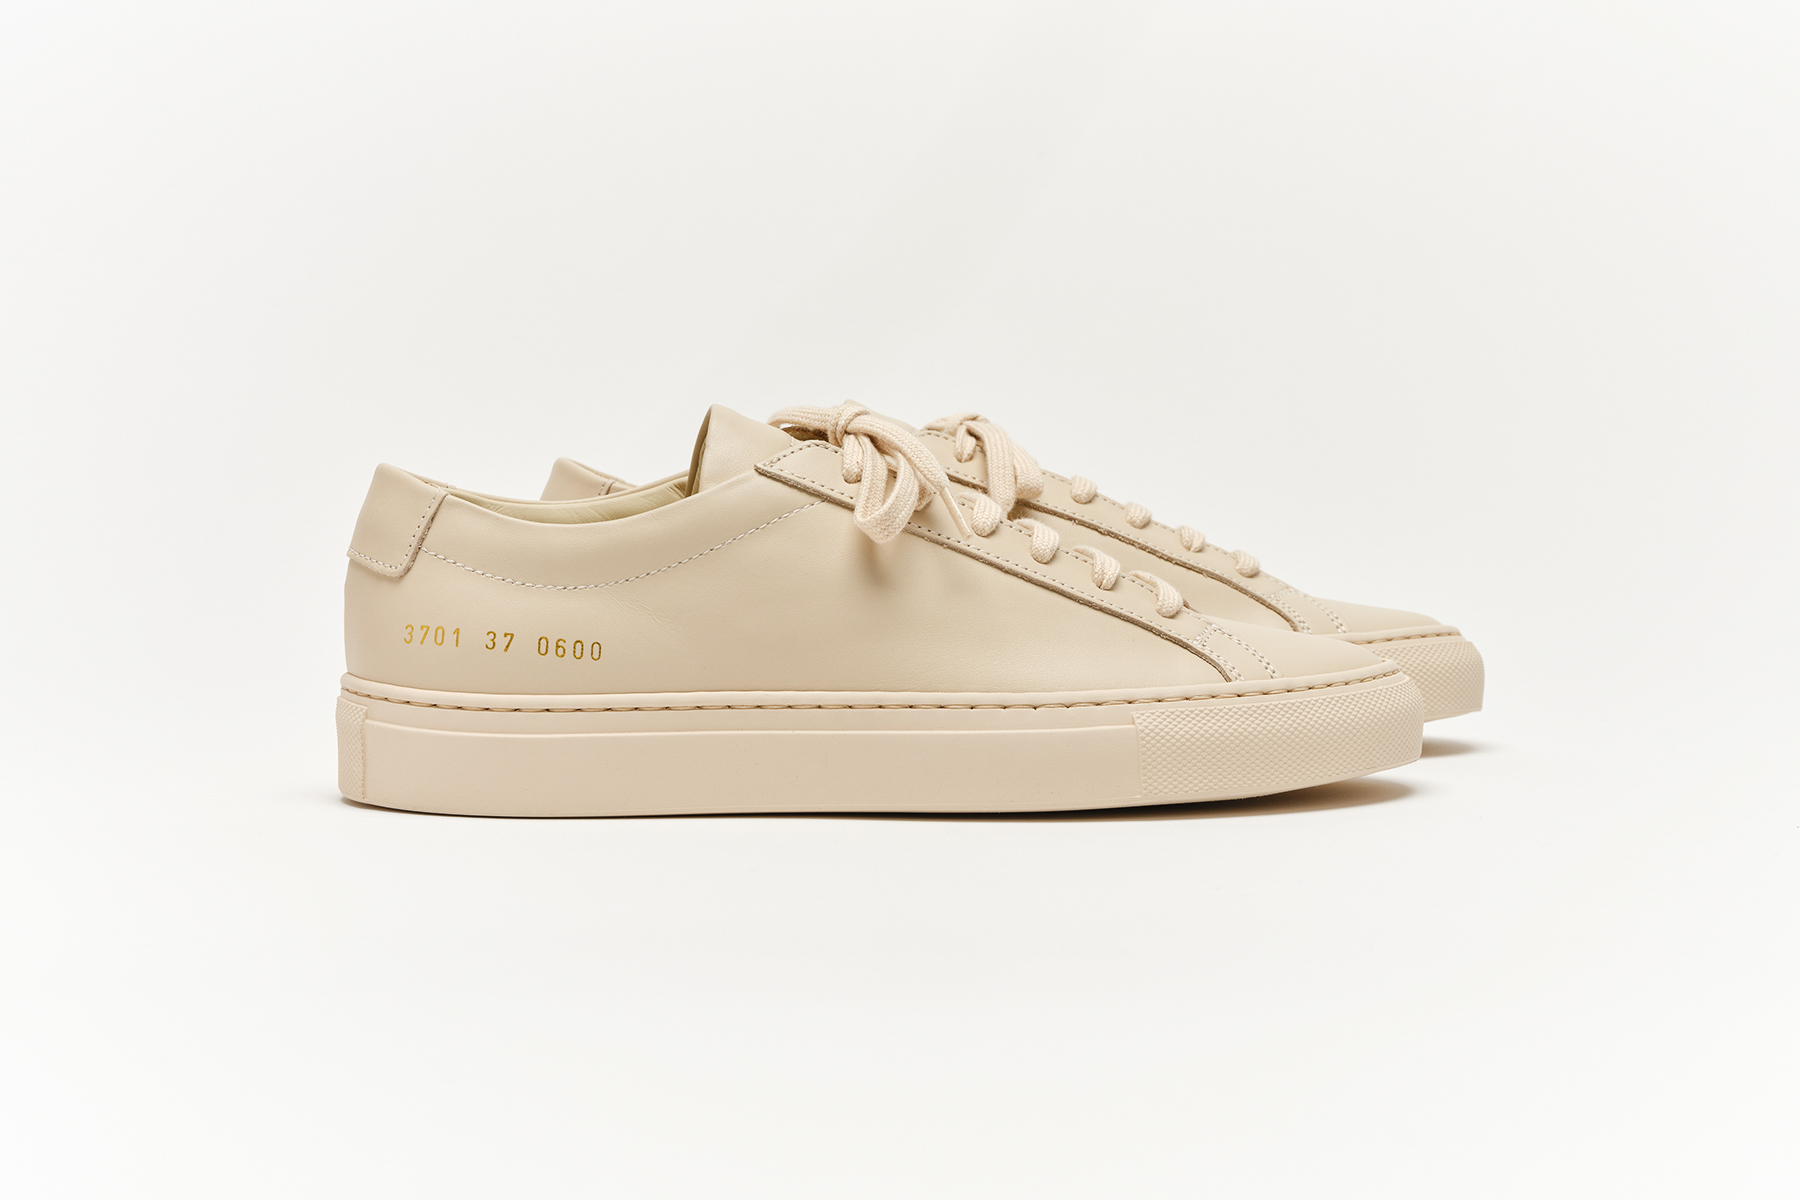 common projects women's shoes